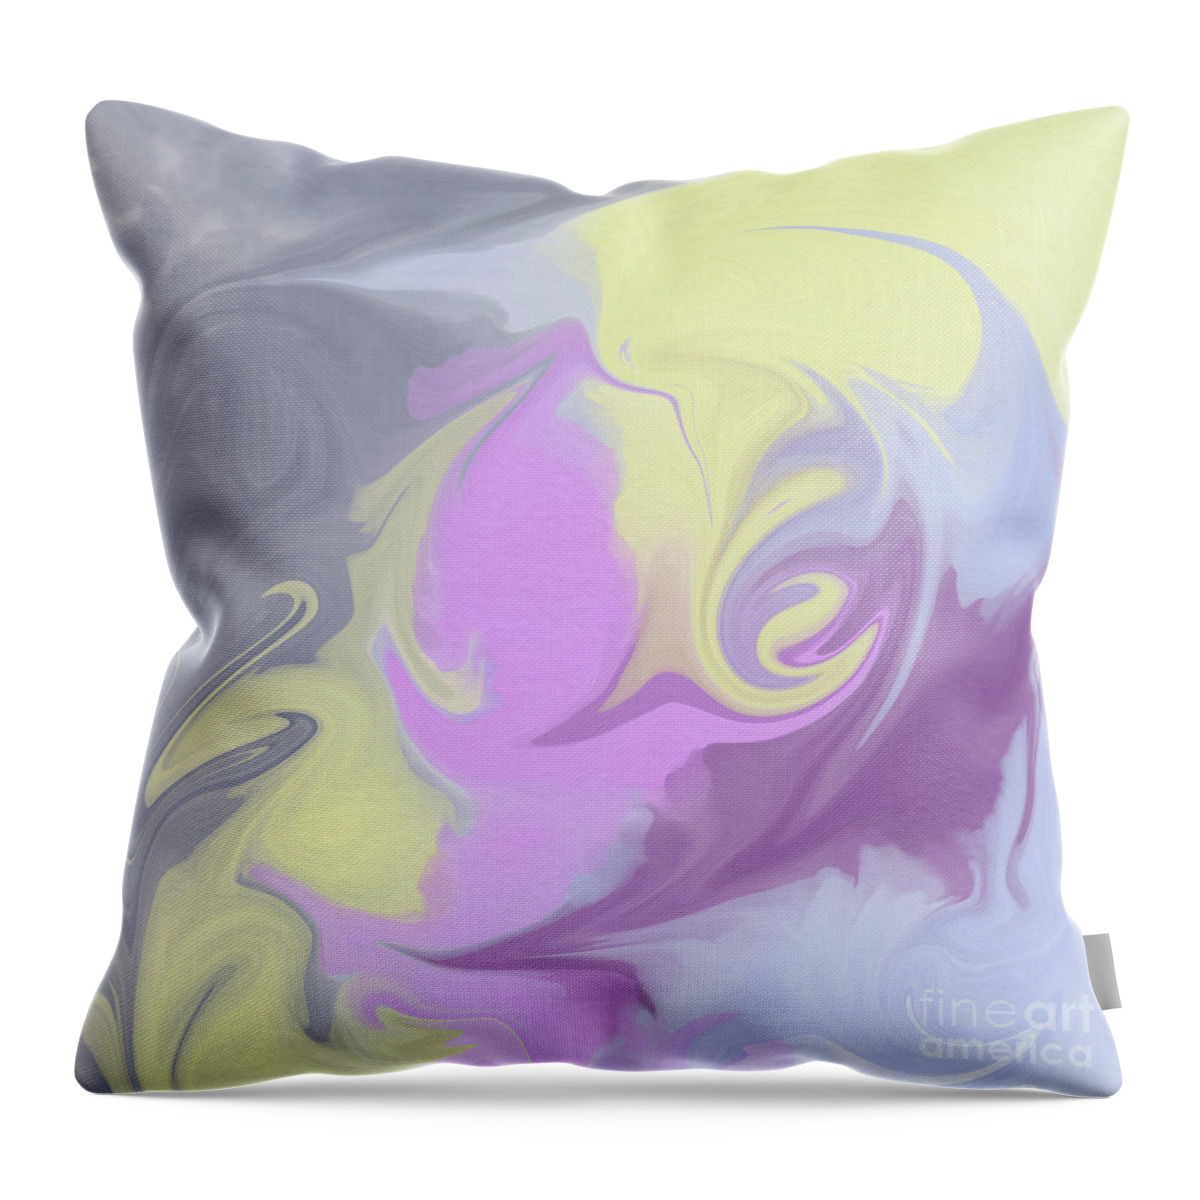 Swirl Throw Pillow featuring the digital art Swirling abstract in purple and yellow by Bentley Davis